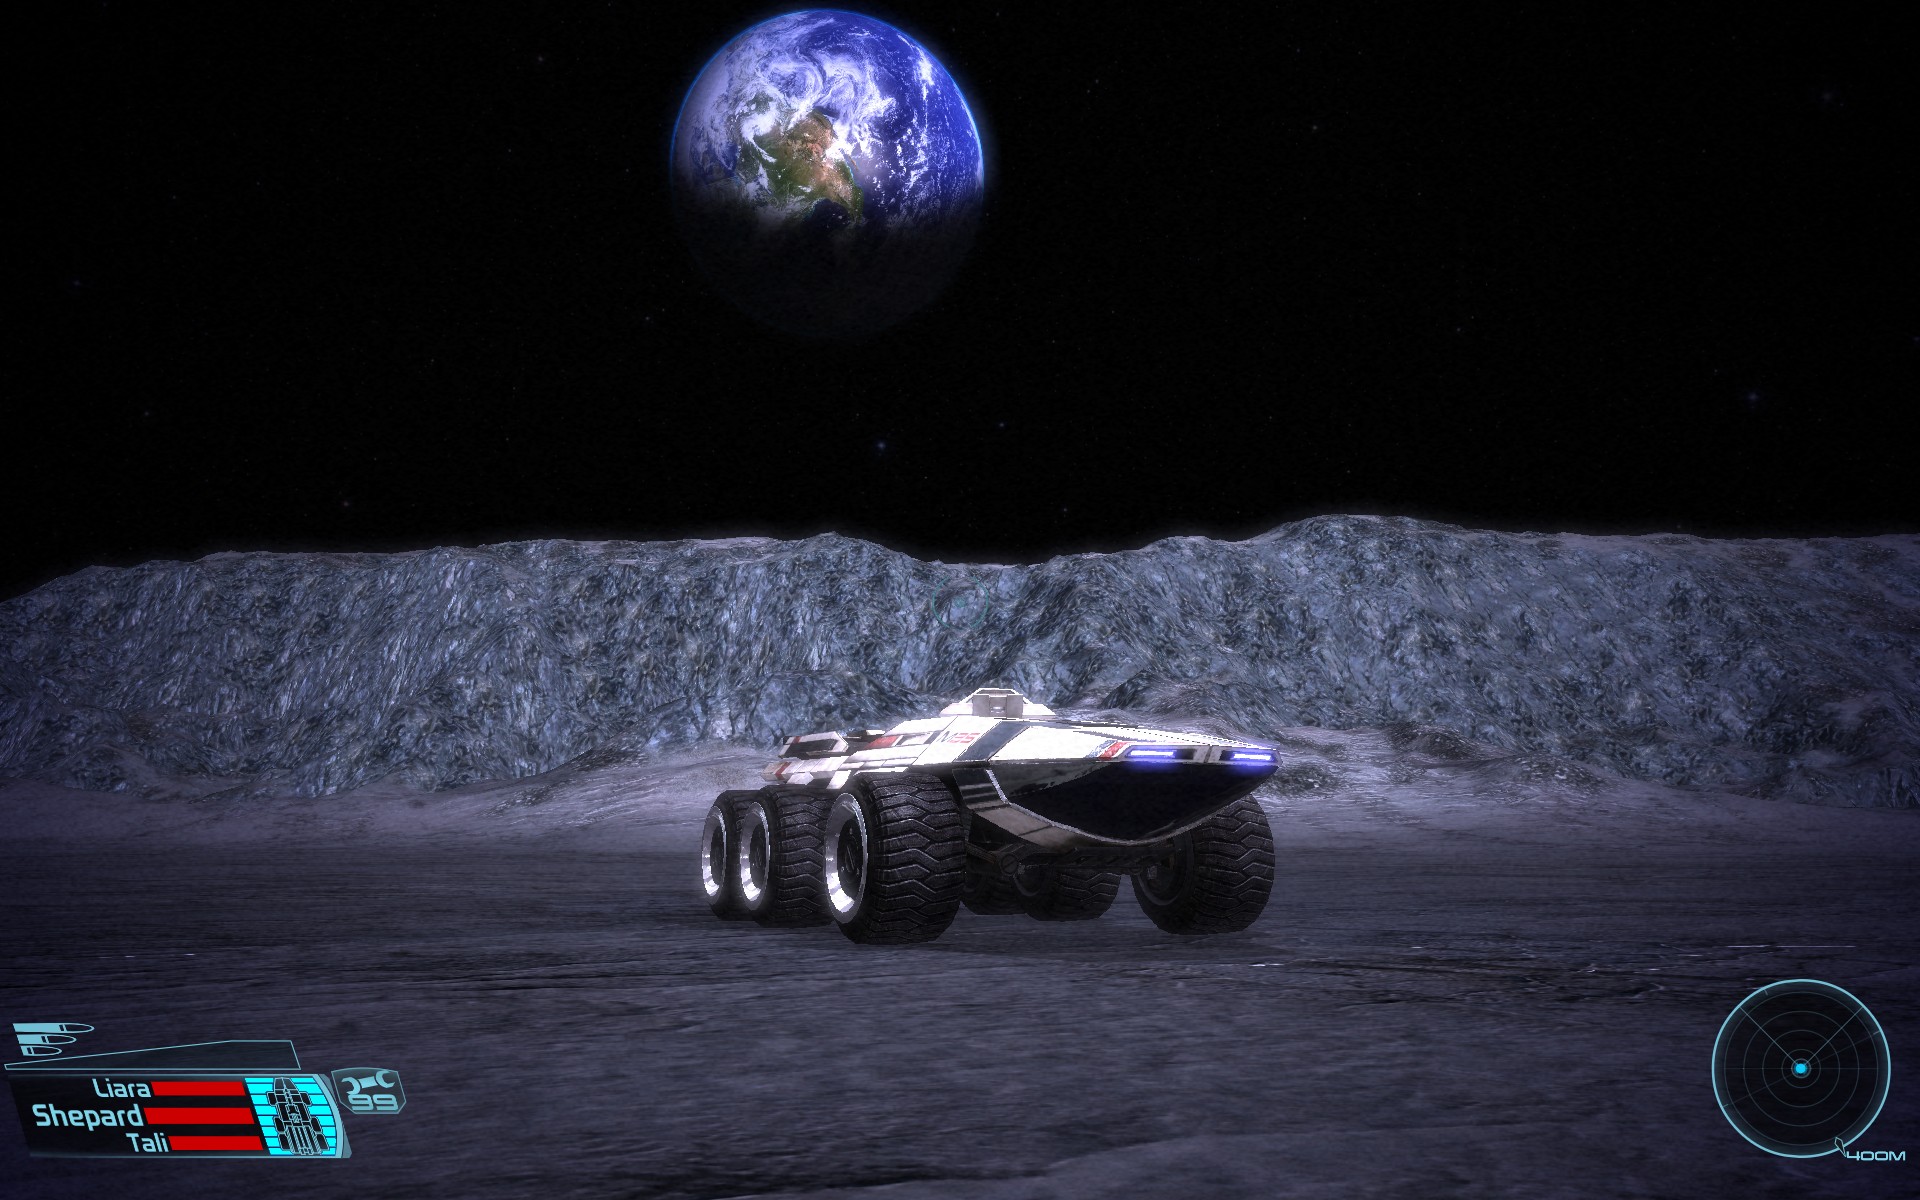 In Mass Effect 1, you drive around each planet in the Mako vehicle to explore.